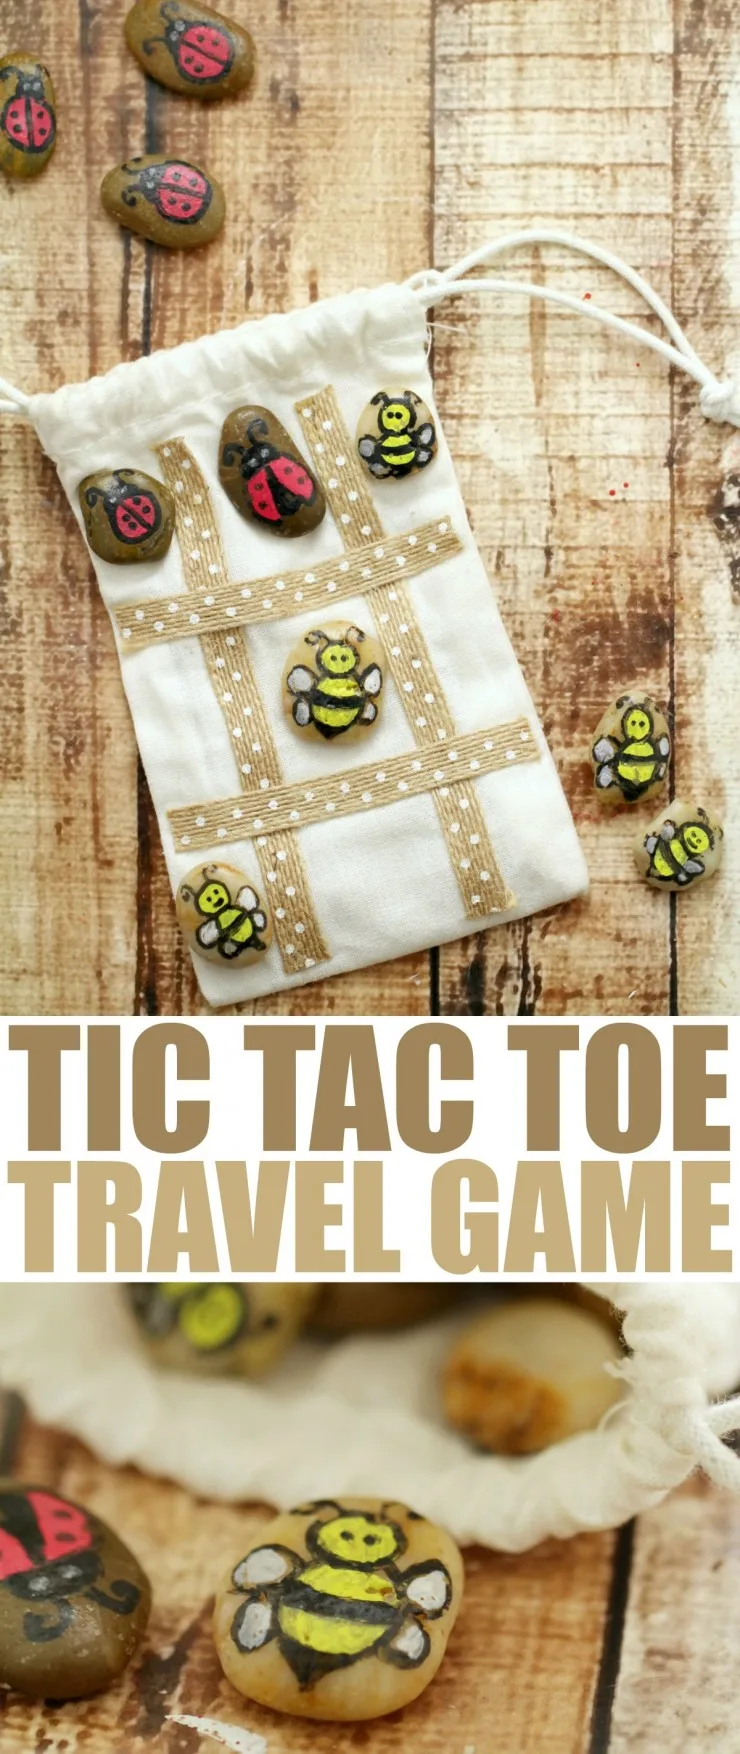 Make your own hand painted tic tac toe travel game to play with at home or on the go. The stone pieces easily store inside their bag which doubles as the play area.